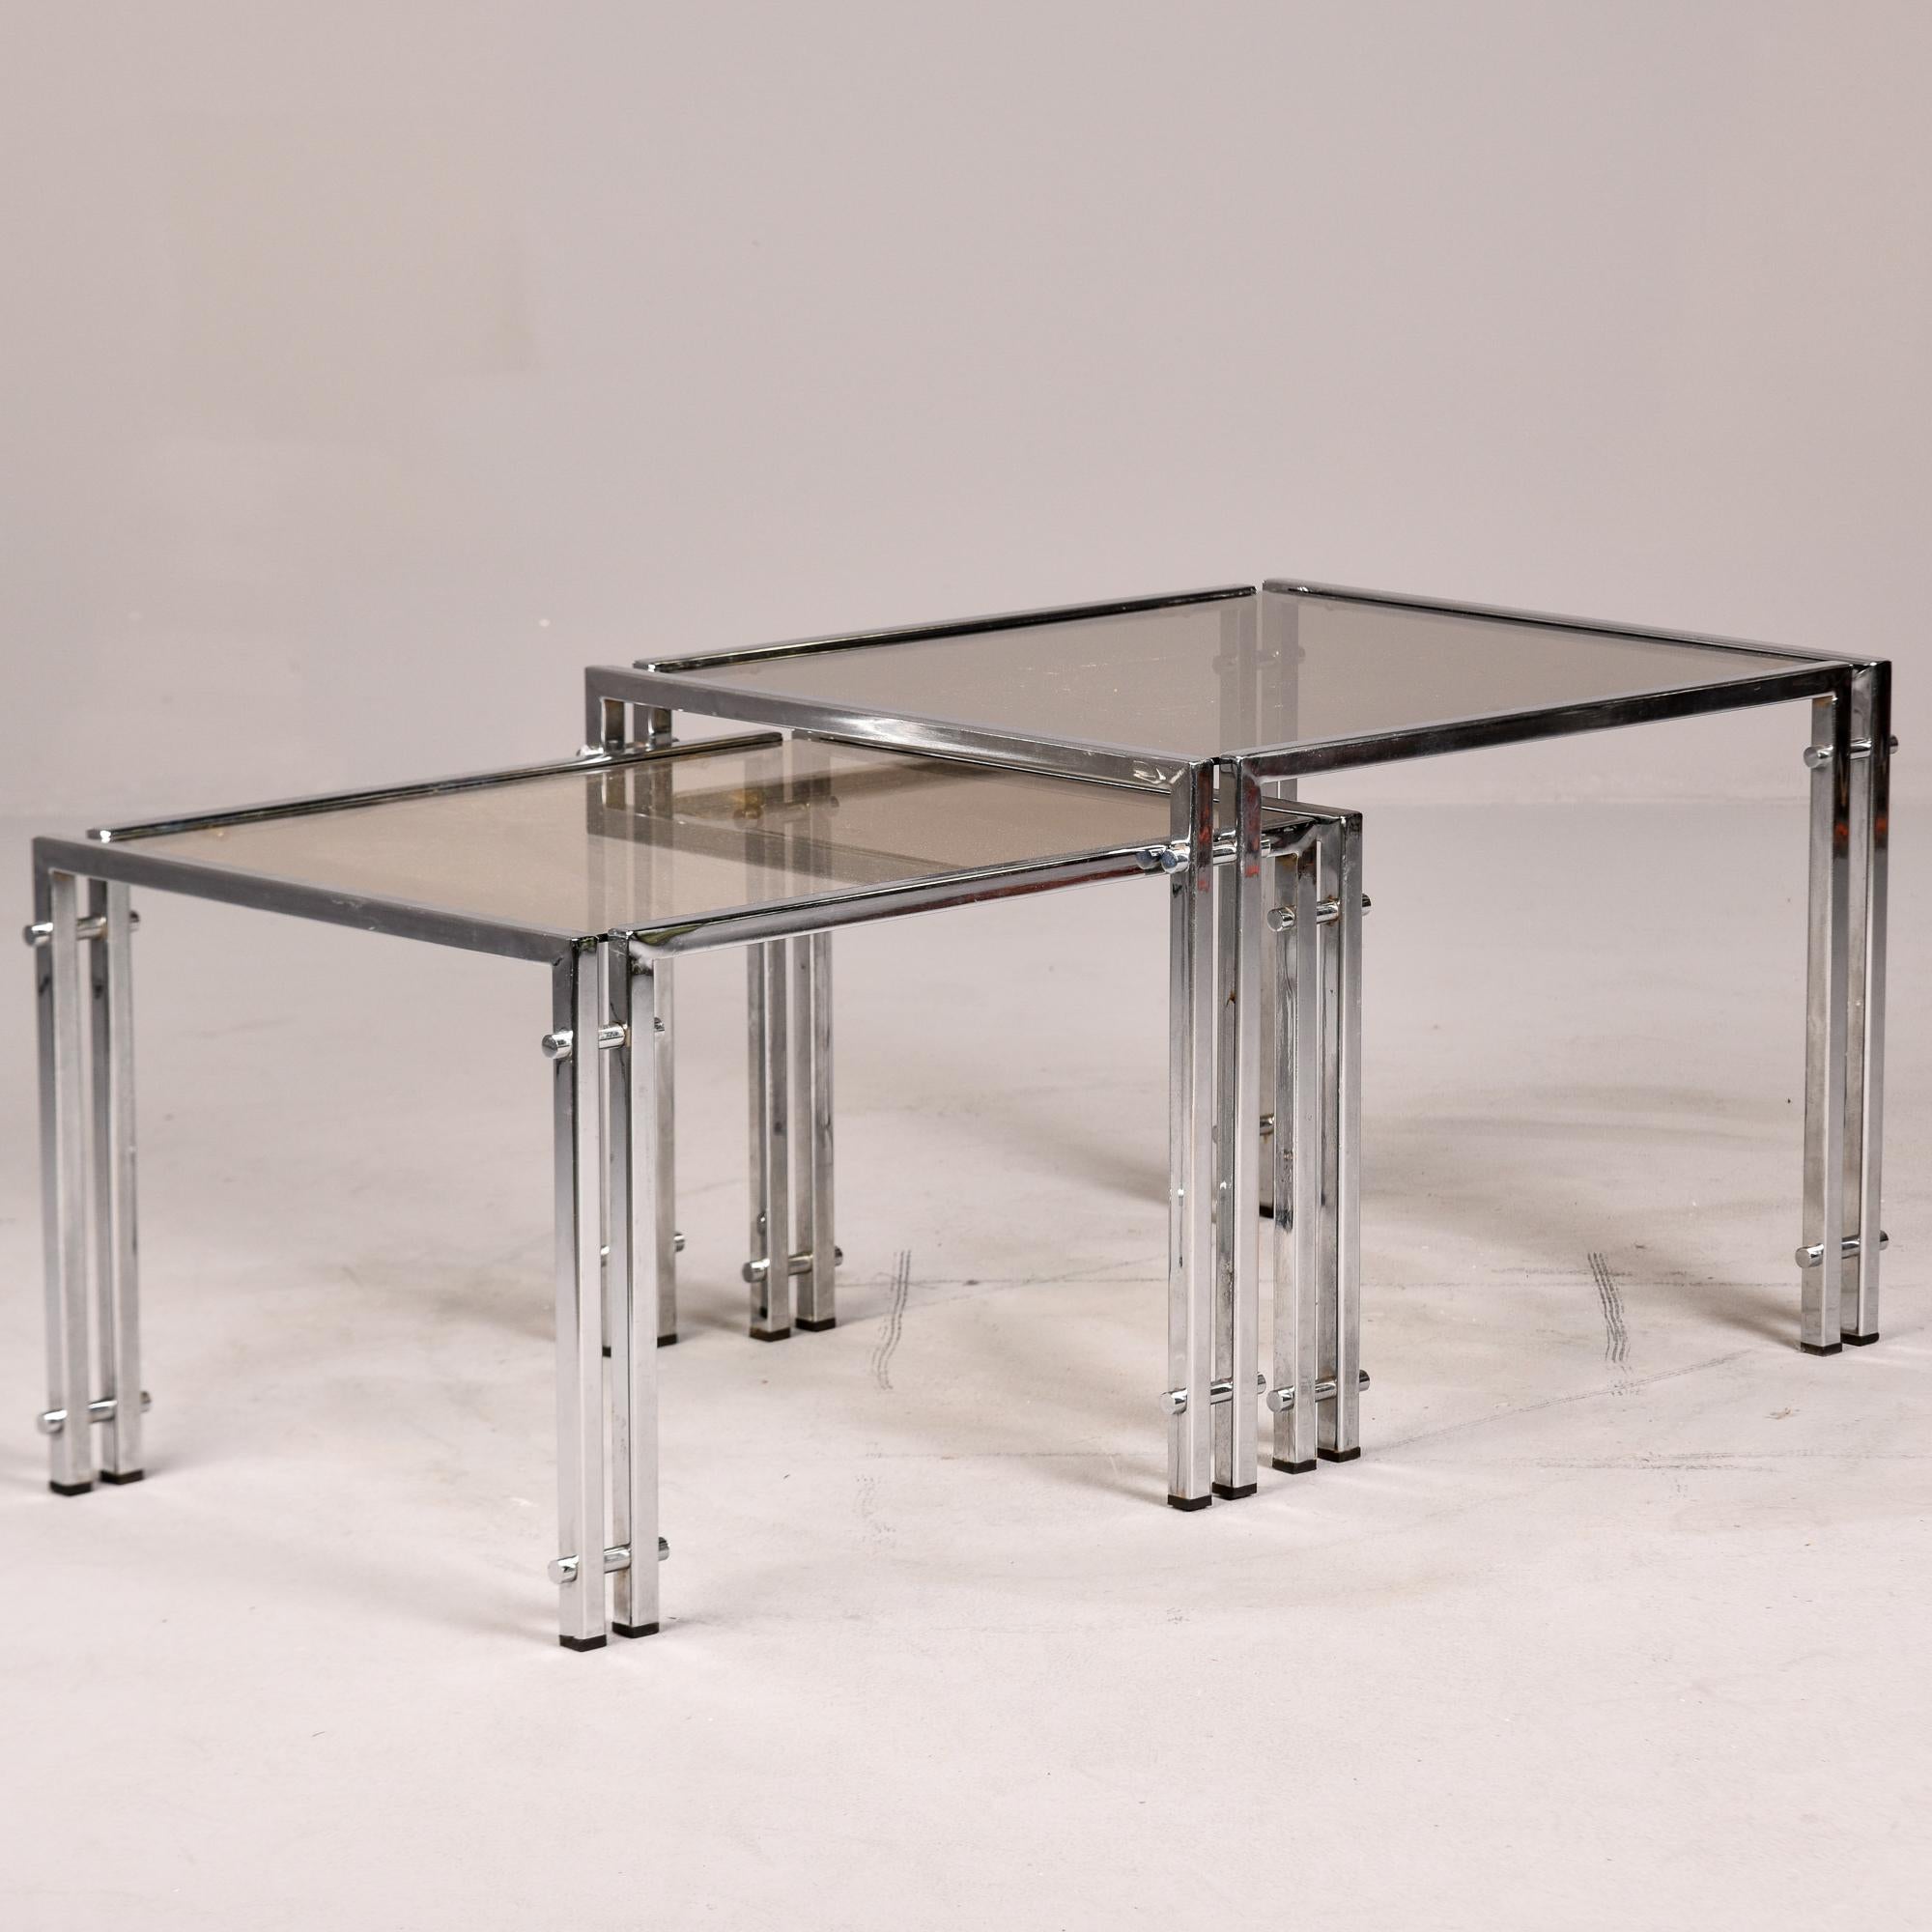 Found in Italy, this pair of circa 1970s nesting tables feature chrome frames and pale smoke-colored glass table tops. Tables have a unique double leg design. Unknown maker. Sold and priced as a set of two. Very good overall vintage condition with